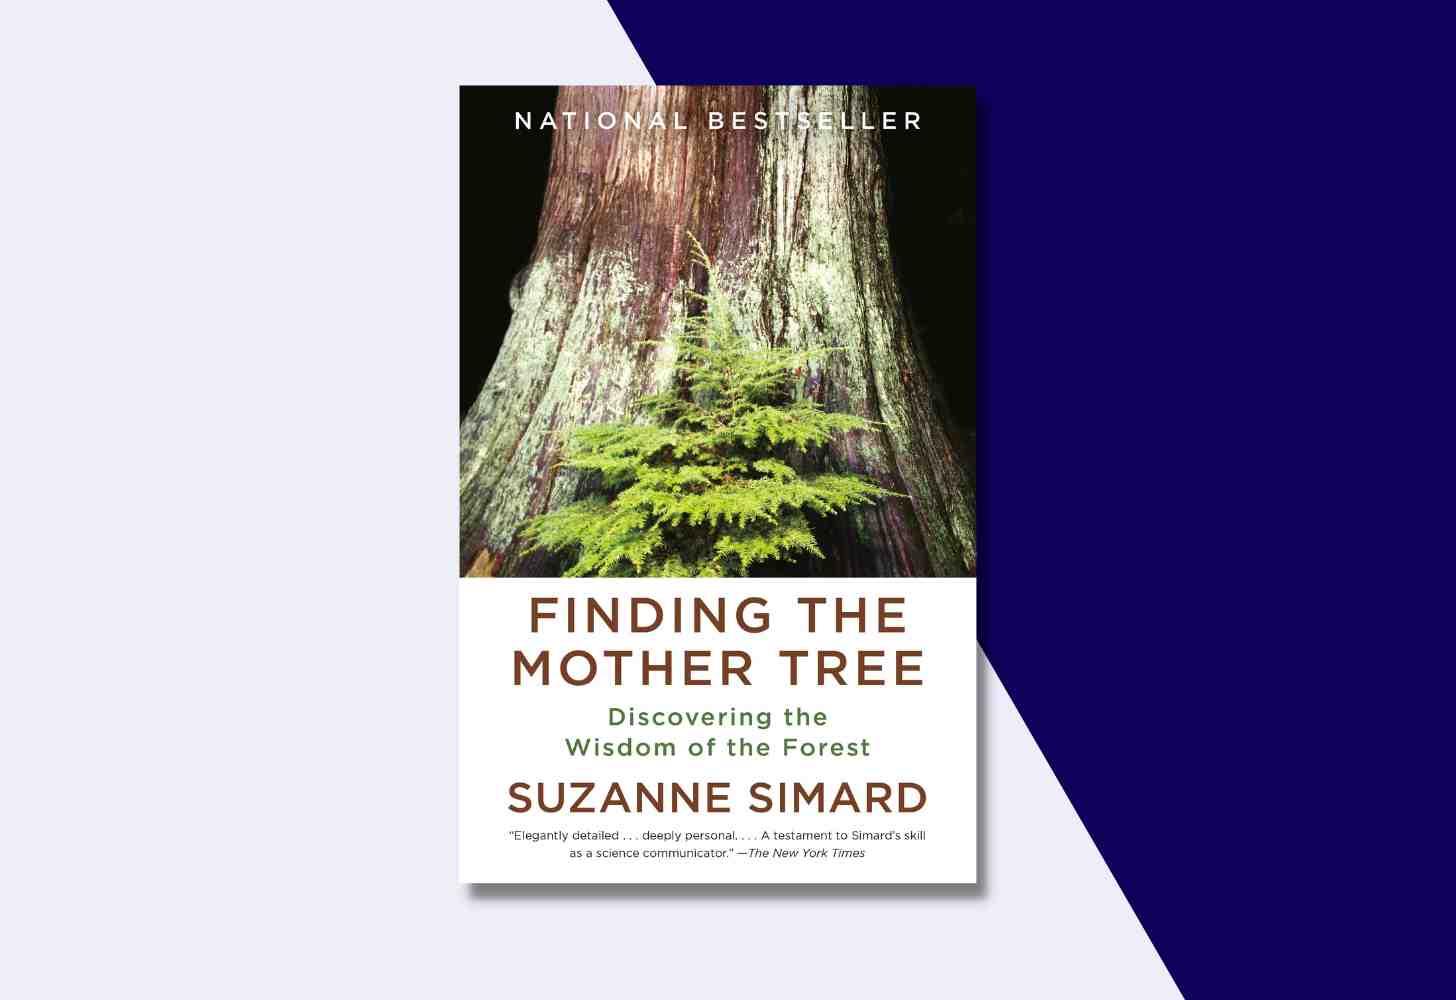 The Cover Of: “Finding the Mother Tree: Discovering the Wisdom of the Forest” by Suzanne Simard